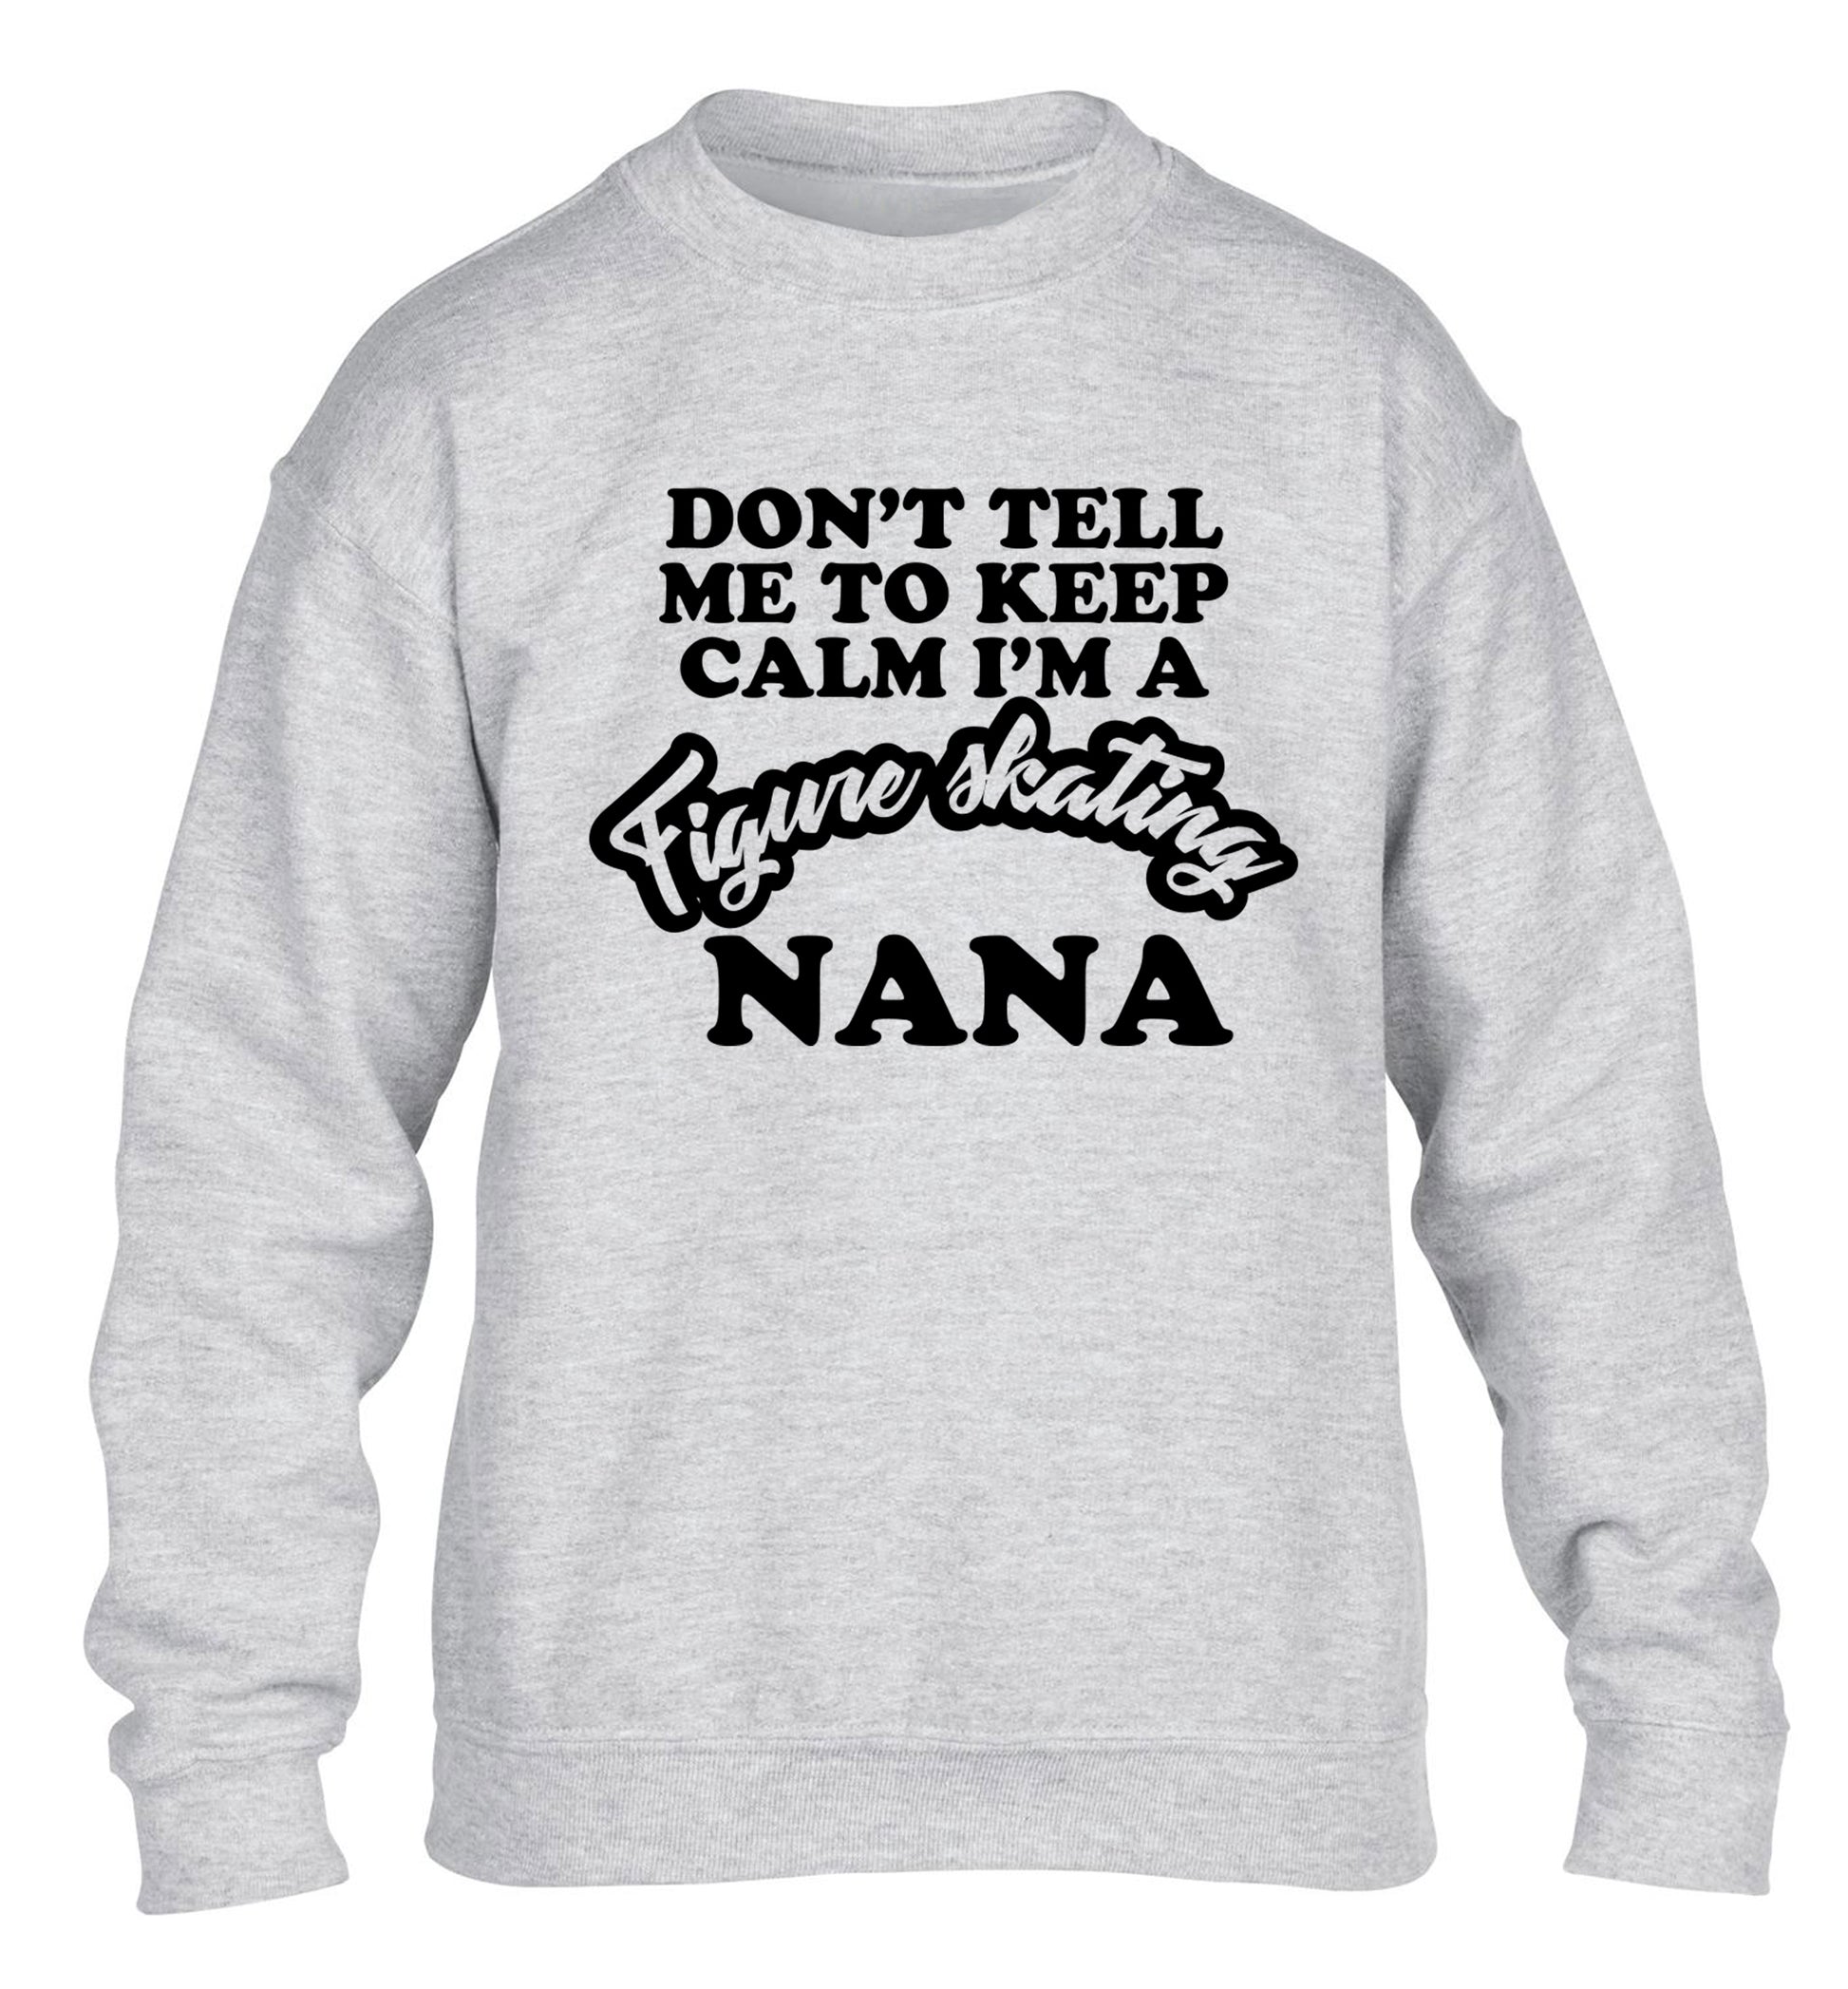 Don't tell me to keep calm I'm a figure skating nana children's grey sweater 12-14 Years